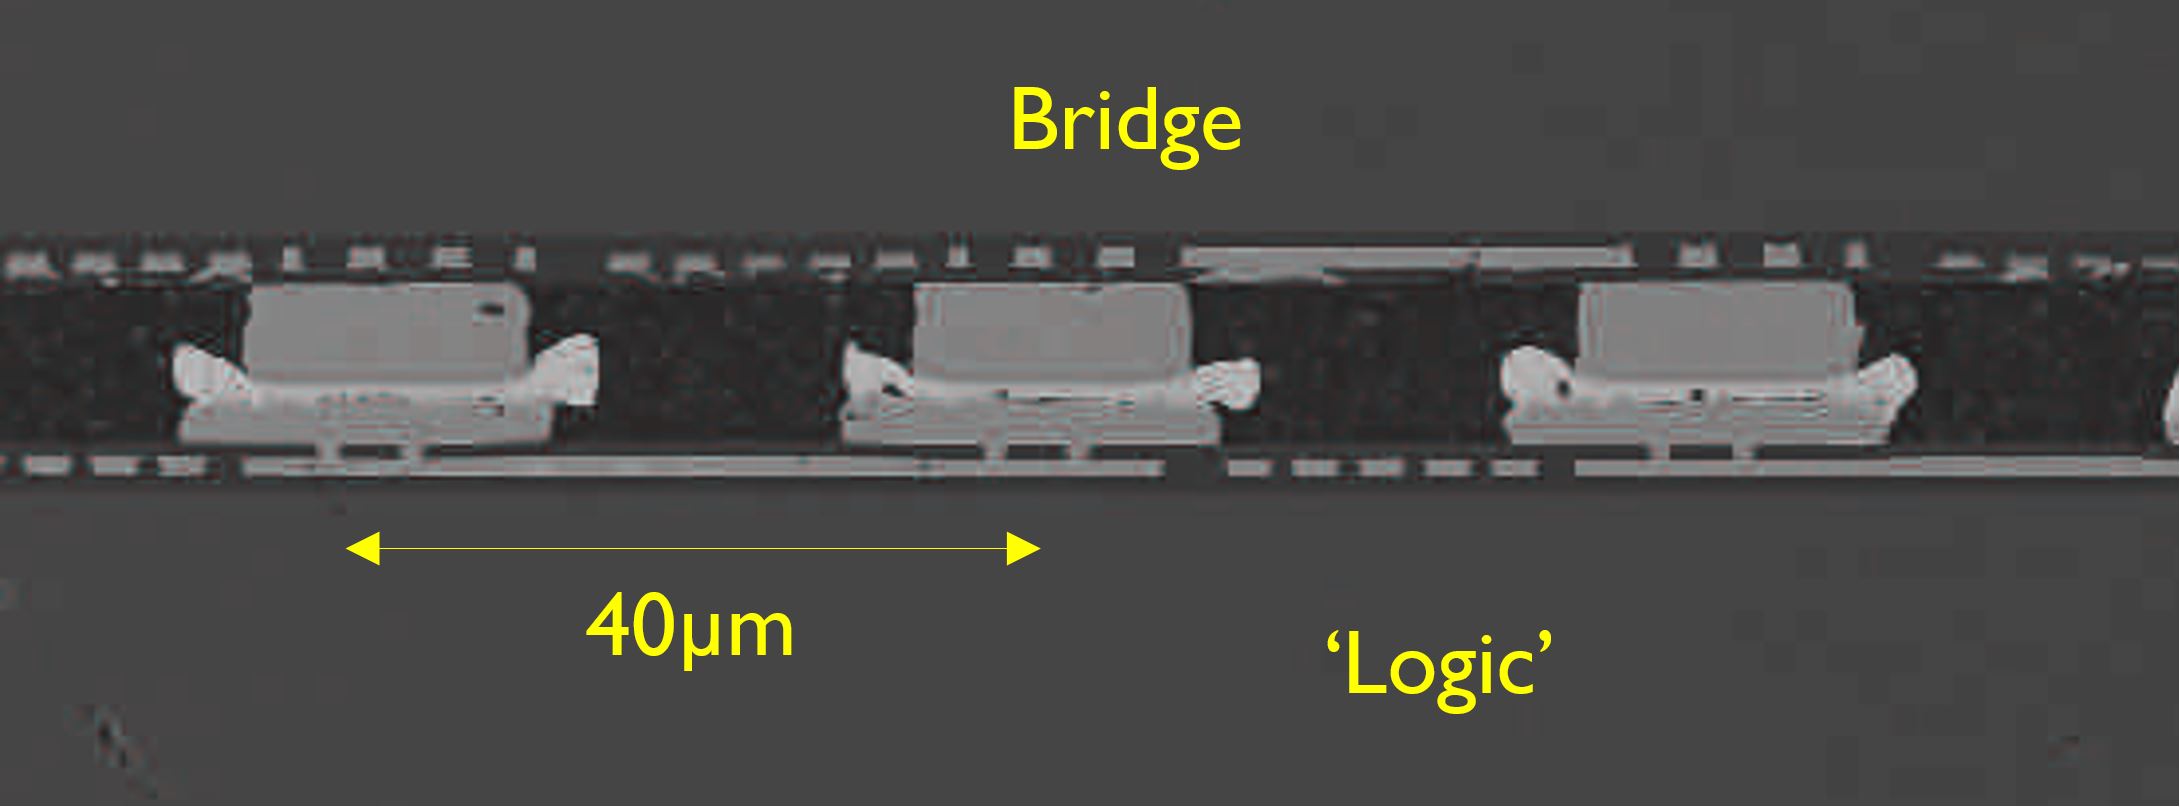 Illustration of the successful bridge-to-logic bonding at 40µm pitch, compatible with 20µm pitch microbump assembly.